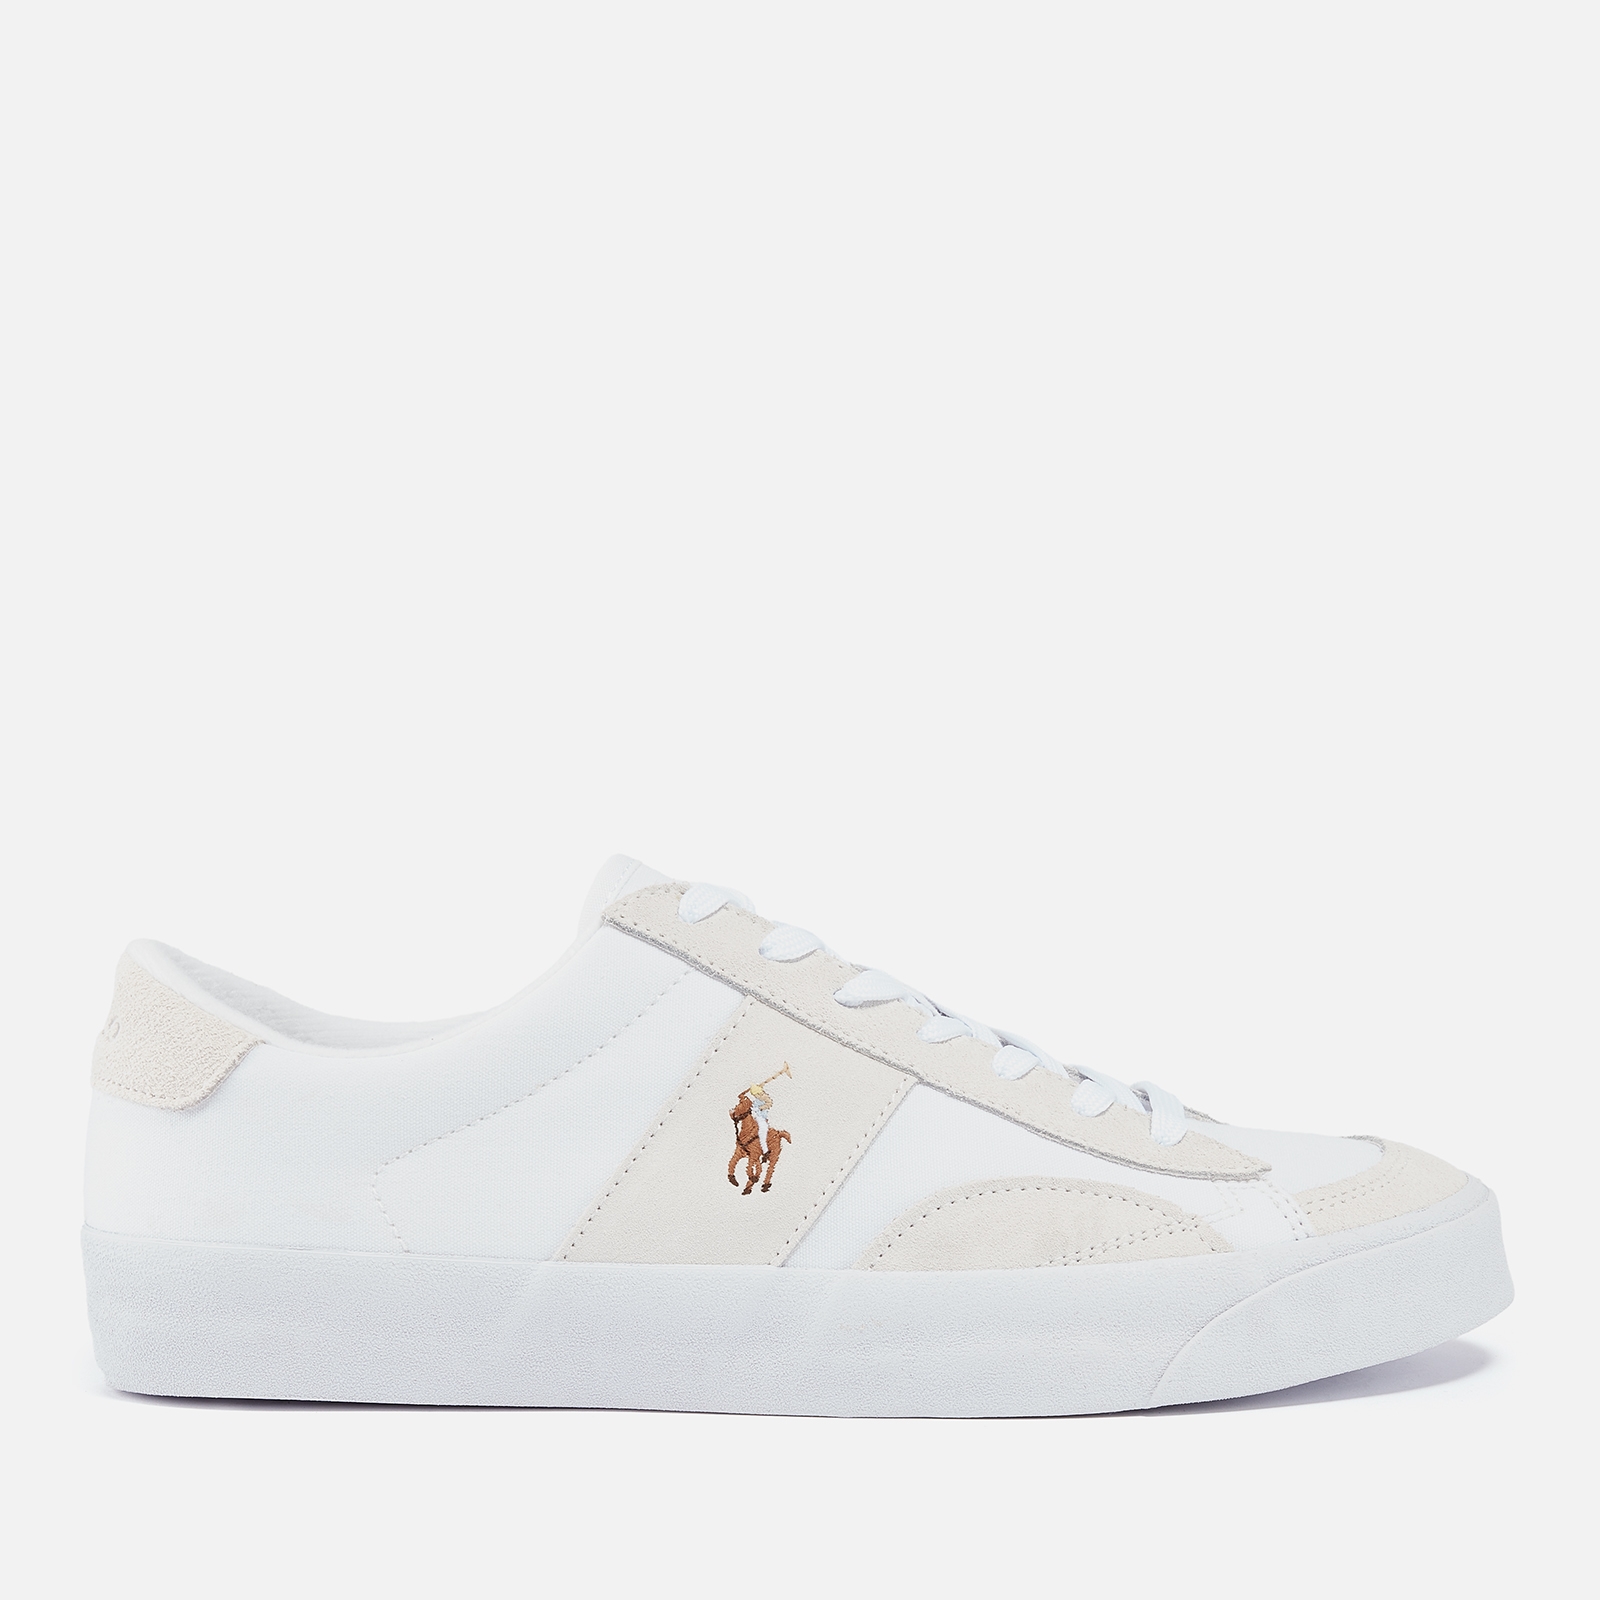 Polo Ralph Lauren Men’s Sayer Canvas and Suede Trainers